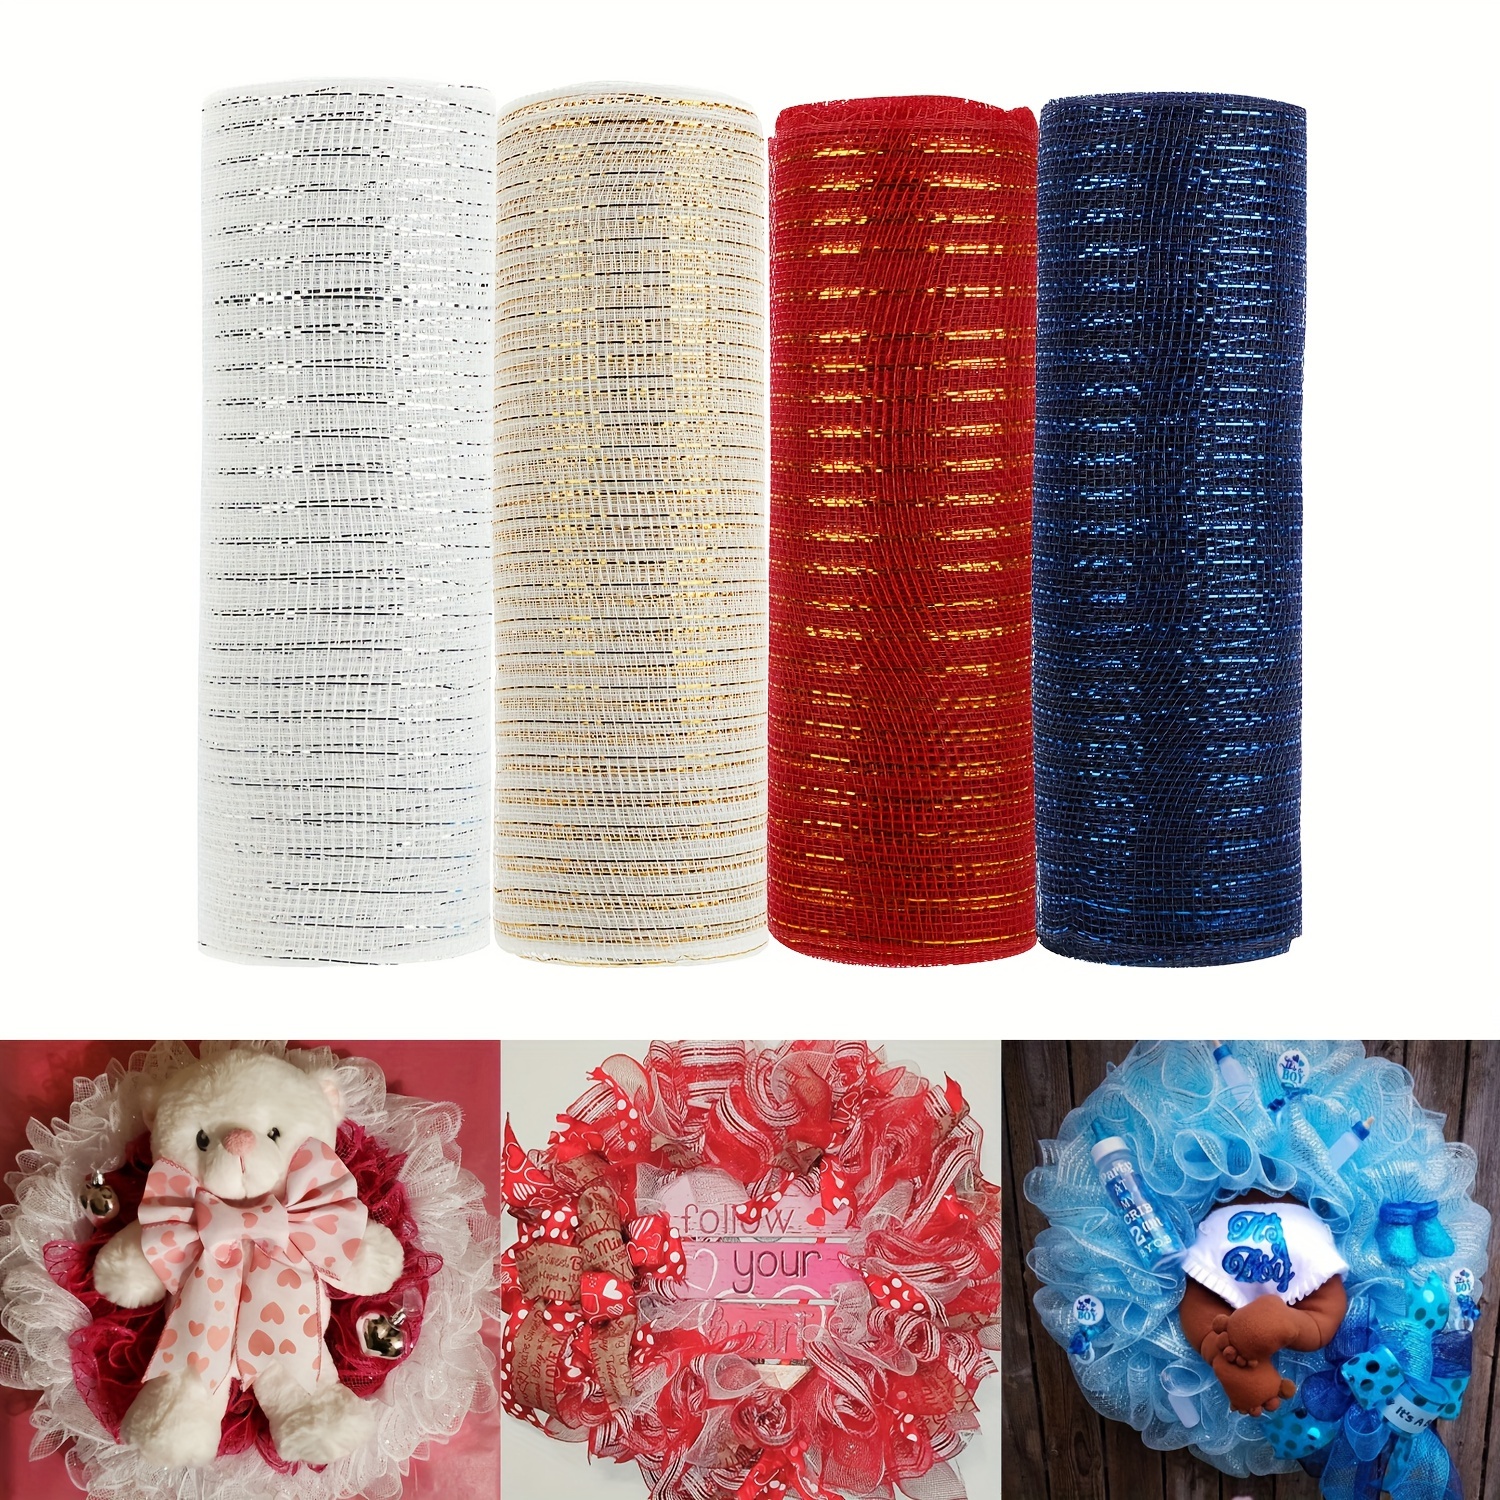 

10 Yards/1 Roll, Colorful Diy Craft Holiday Day Christmas Tree Decorative Poly Deco 26cm Mesh Wire Ribbon Rolls For Wreath Garland